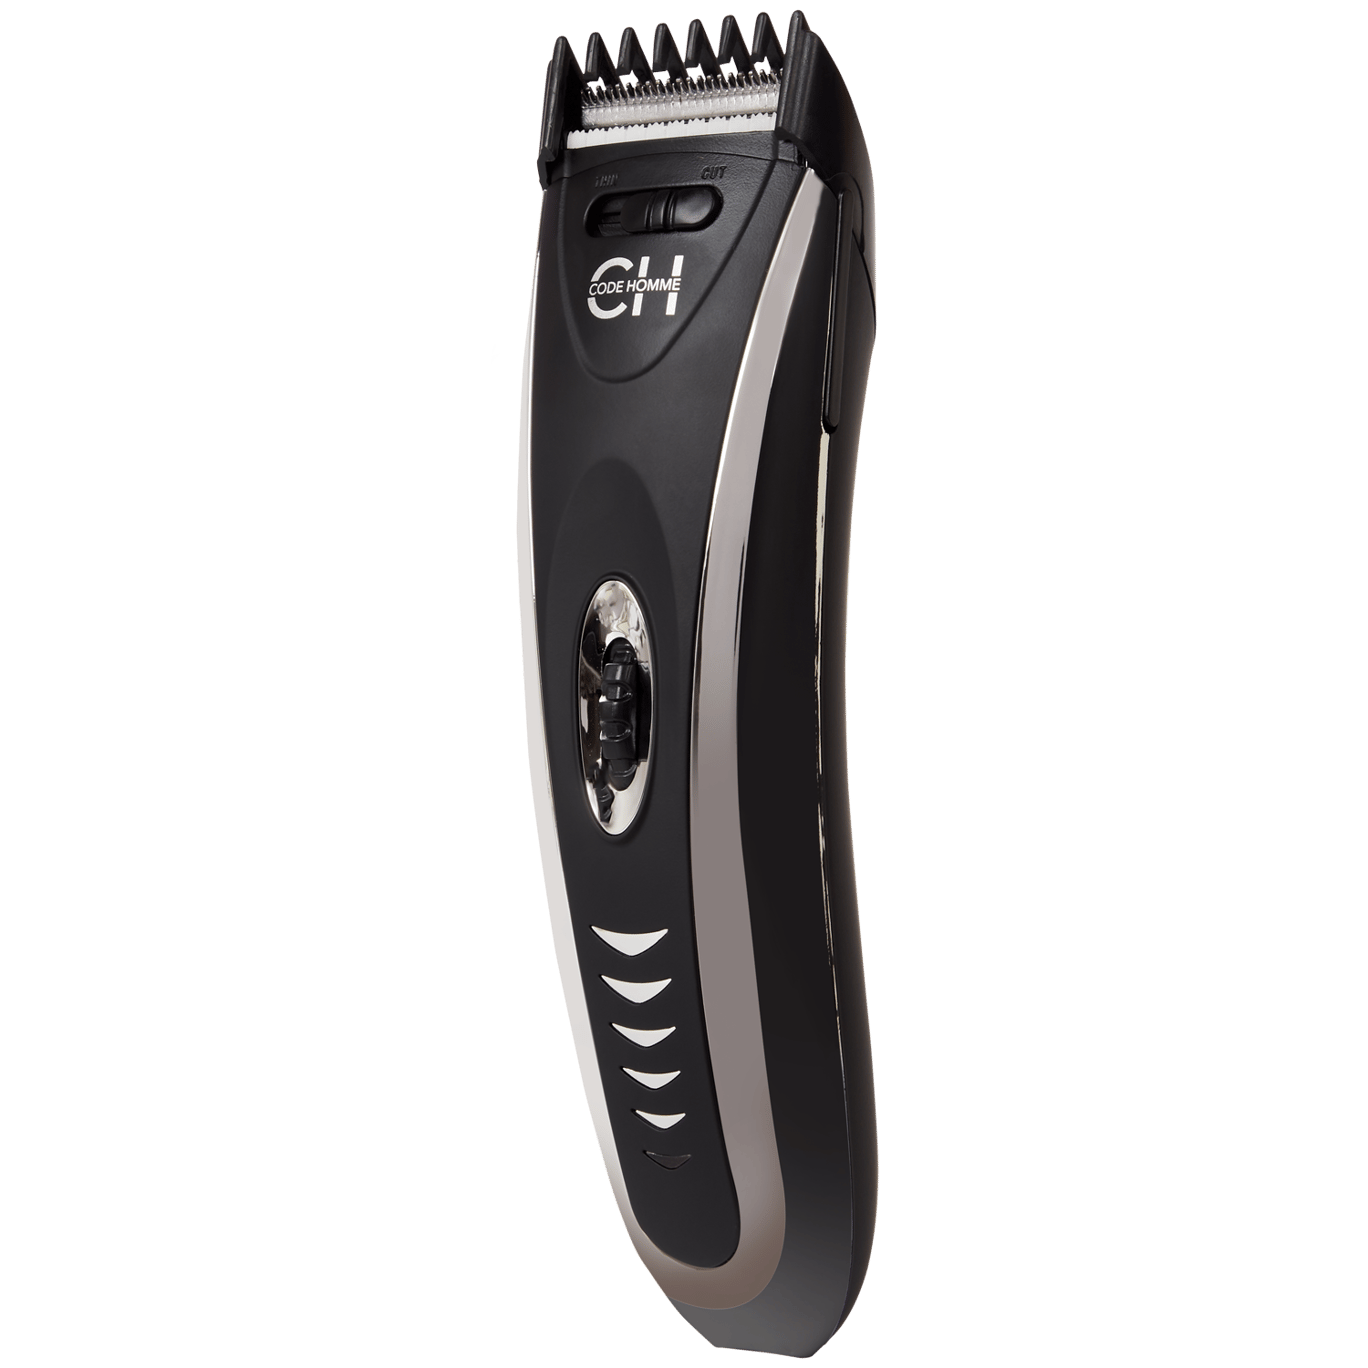 hairdressing clippers and scissors